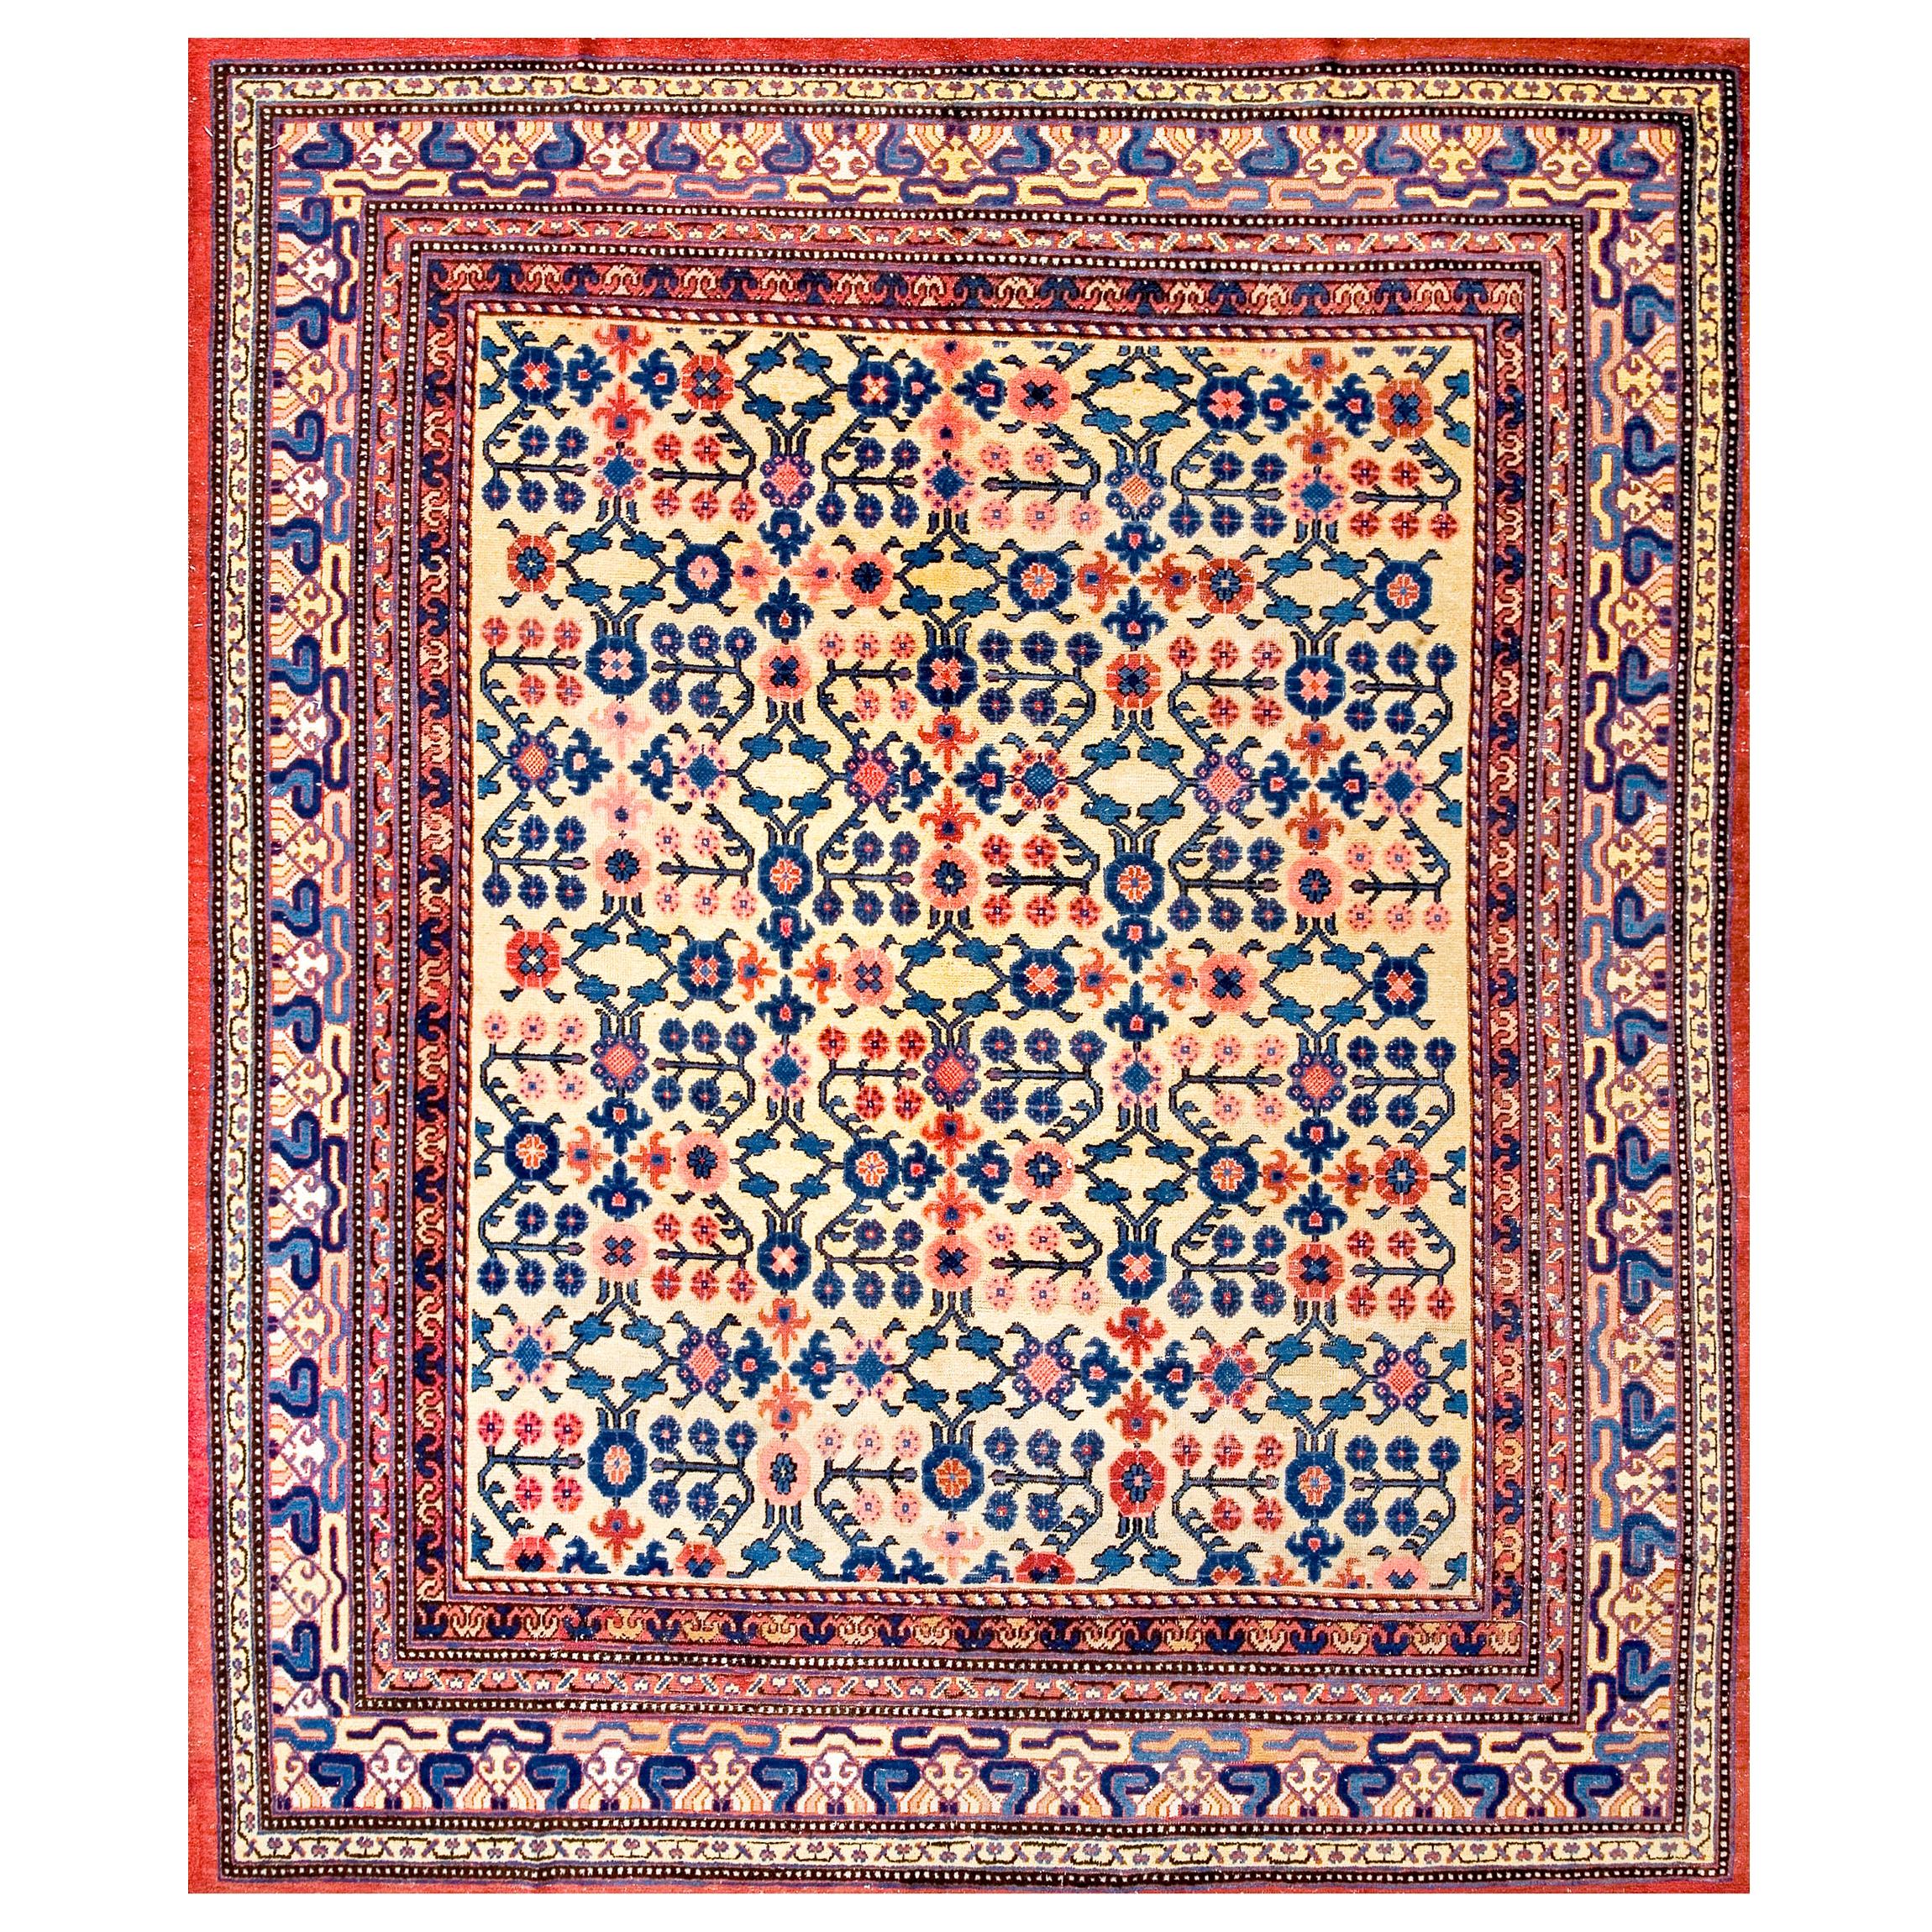 Mid 19th Century Central Asian Yarkand Carpet ( 8'3" x 9'8" - 252 x 295 ) For Sale